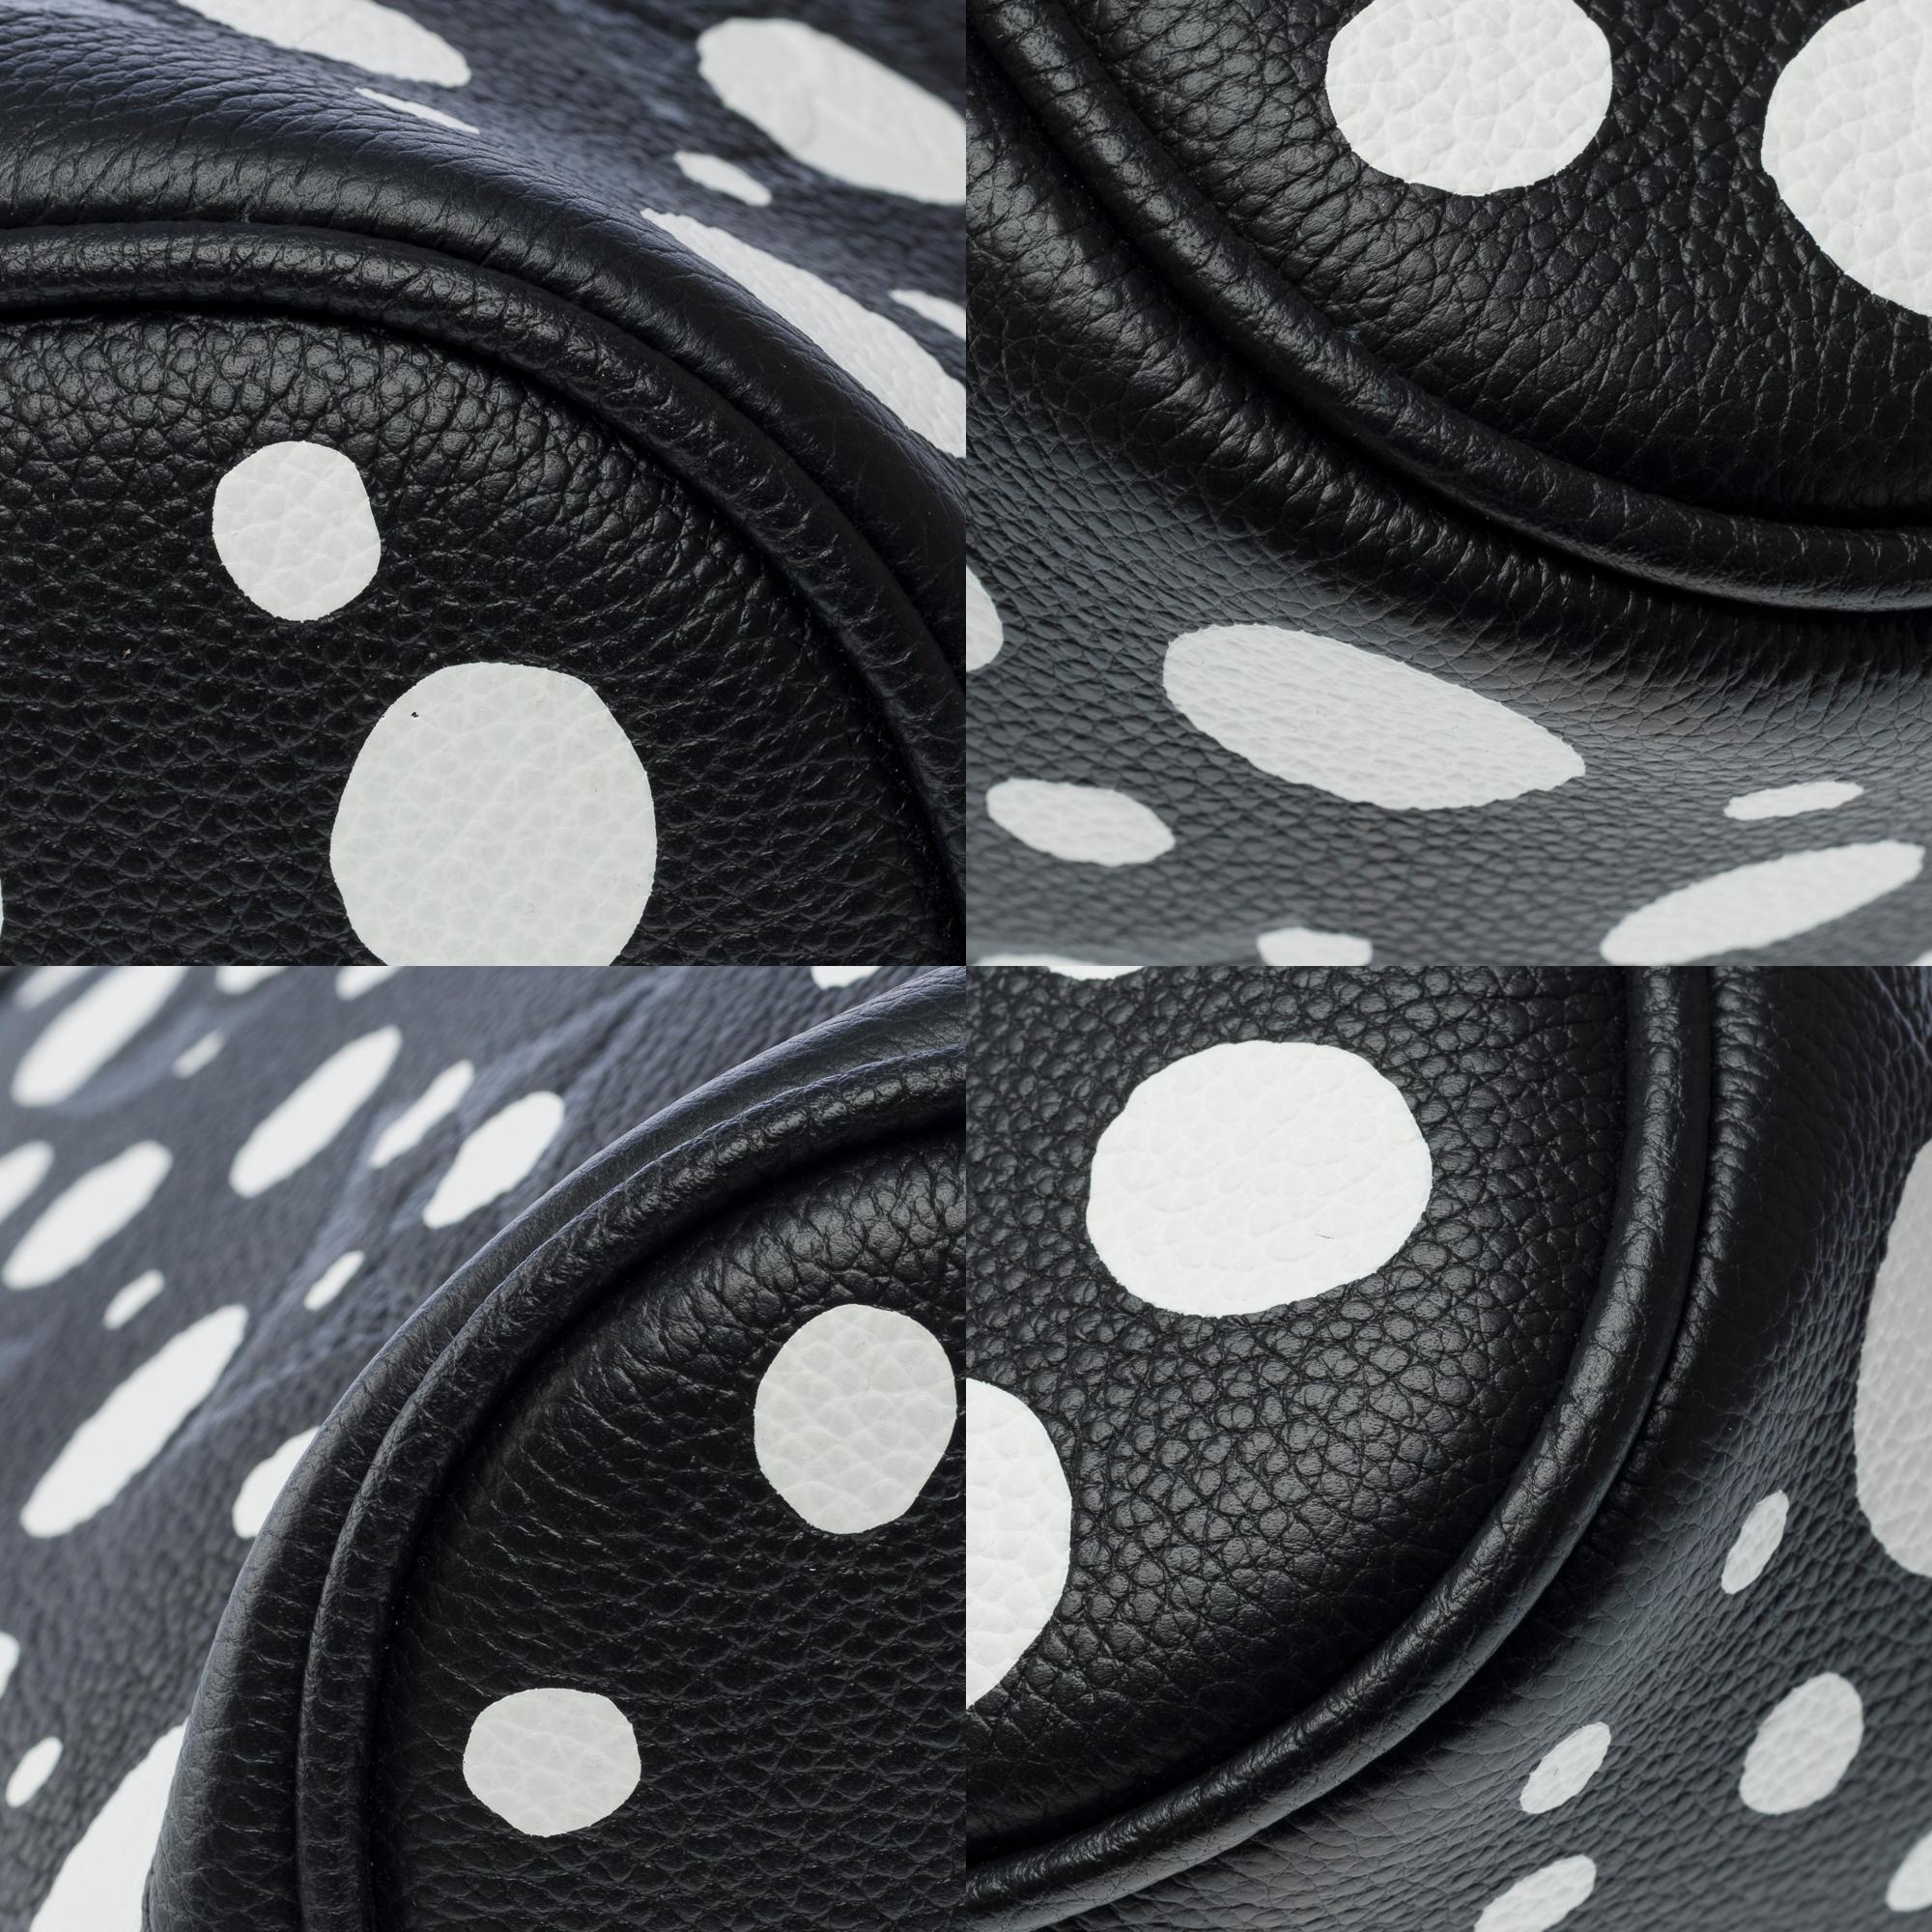 Limited Edition LV x Yayoi Kusama Marshmallow Tote bag in White&Black, SHW 6